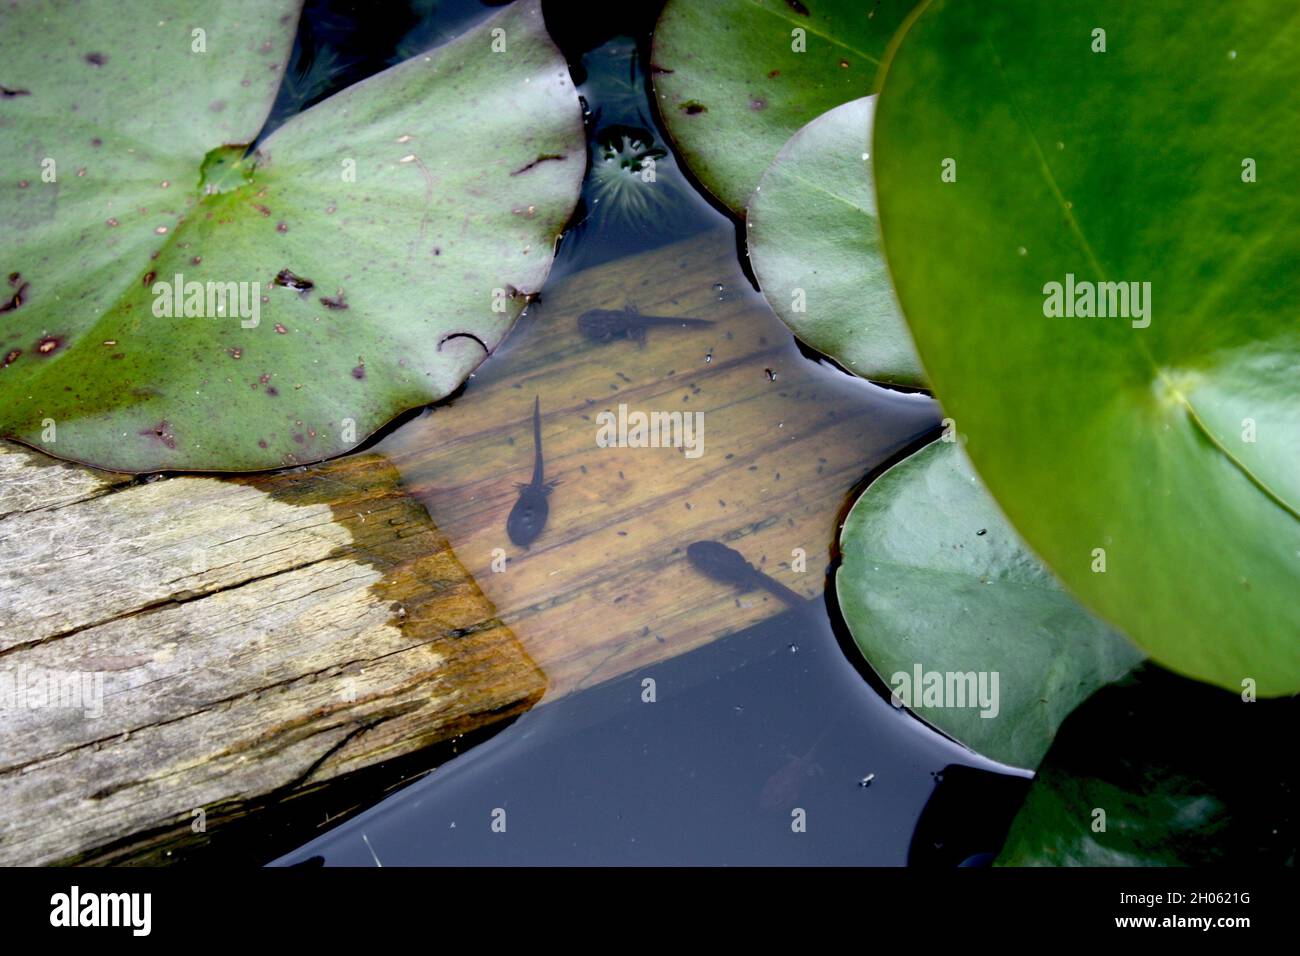 Tadpoles develop into frogs in a pond. Stock Photo